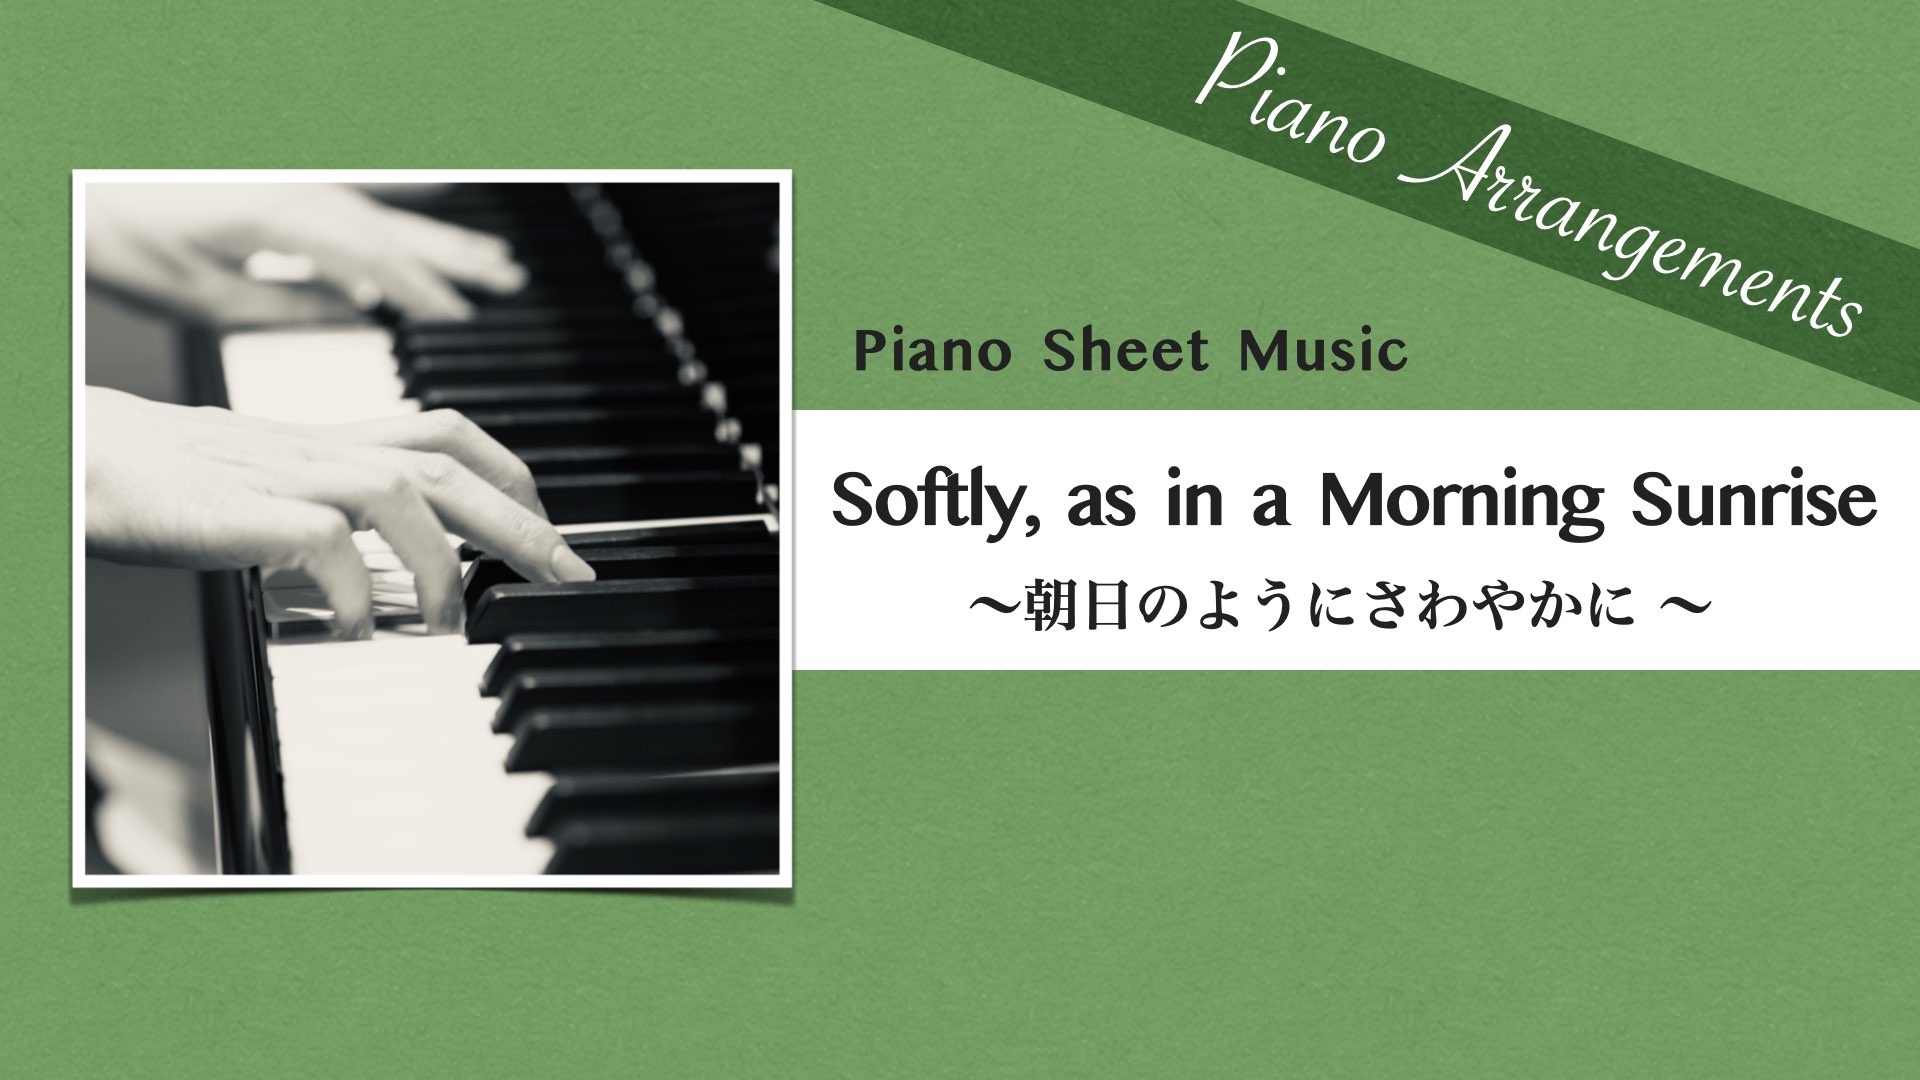 Softly, as in a Morning Sunrise/Jazz Standard【Piano Sheet Music】